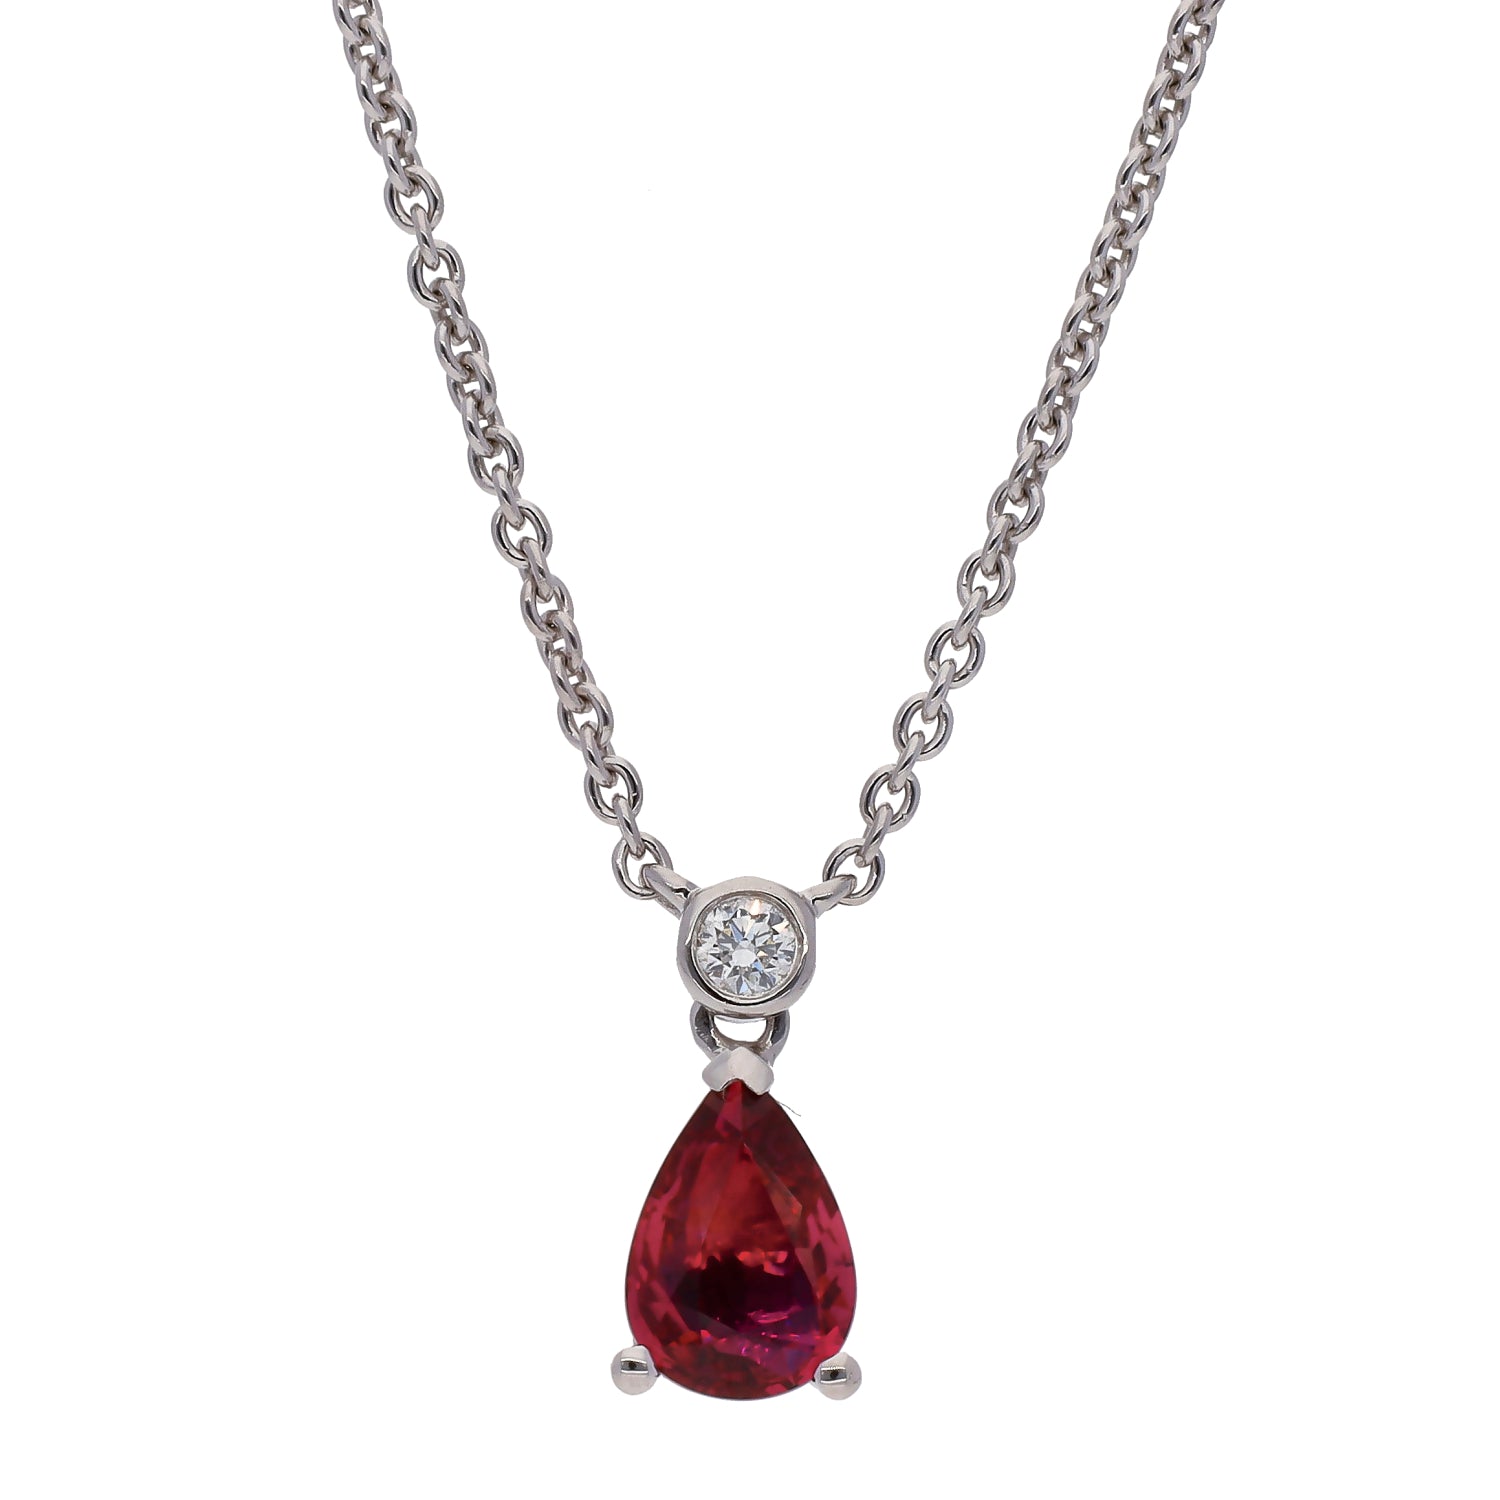 18K White Gold Pear Shaped Ruby & Diamond Pendant on 16" Chain Necklace